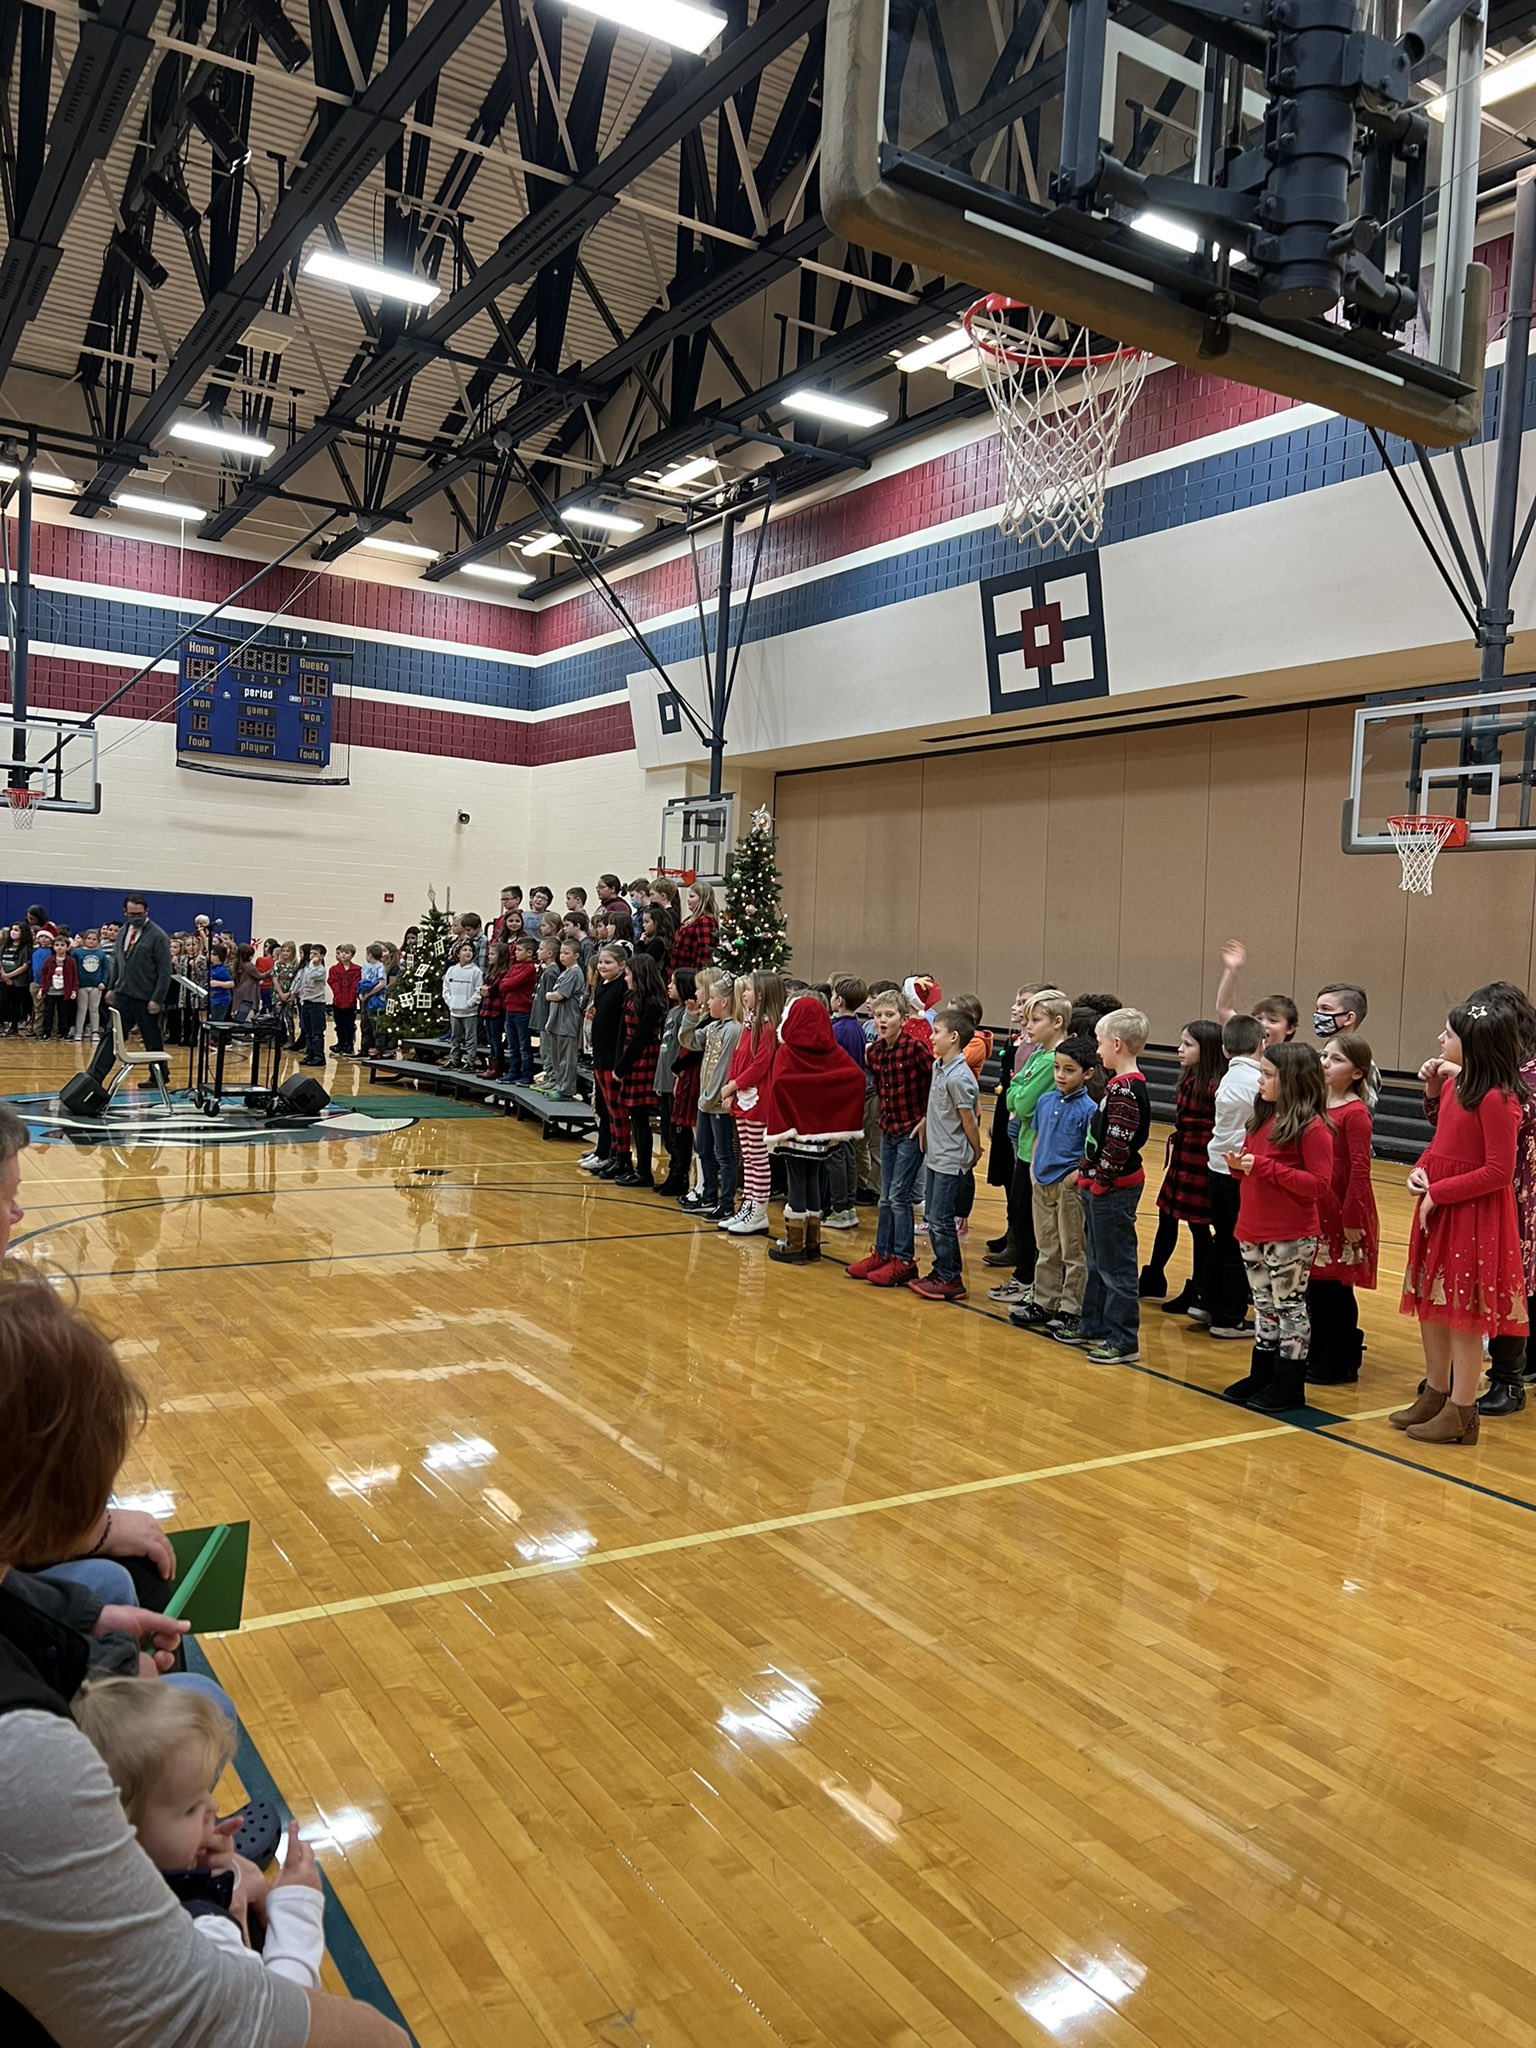 Students on risers and lined up for a Christmas concert